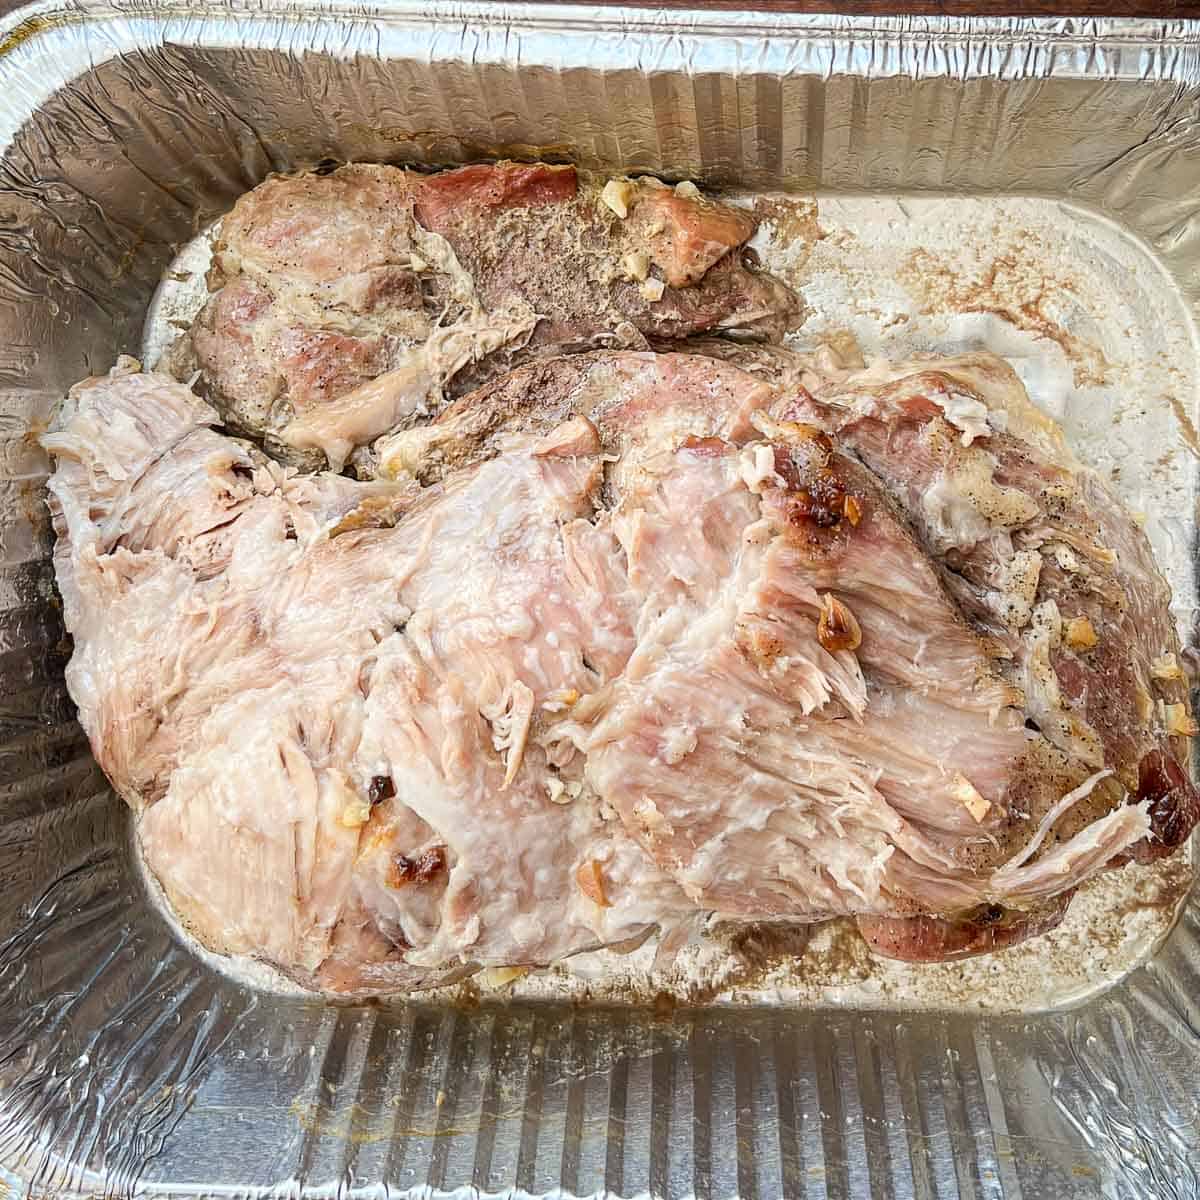 Slow cooked pork with the fat cap removed resting inside a disposable roasting pan.